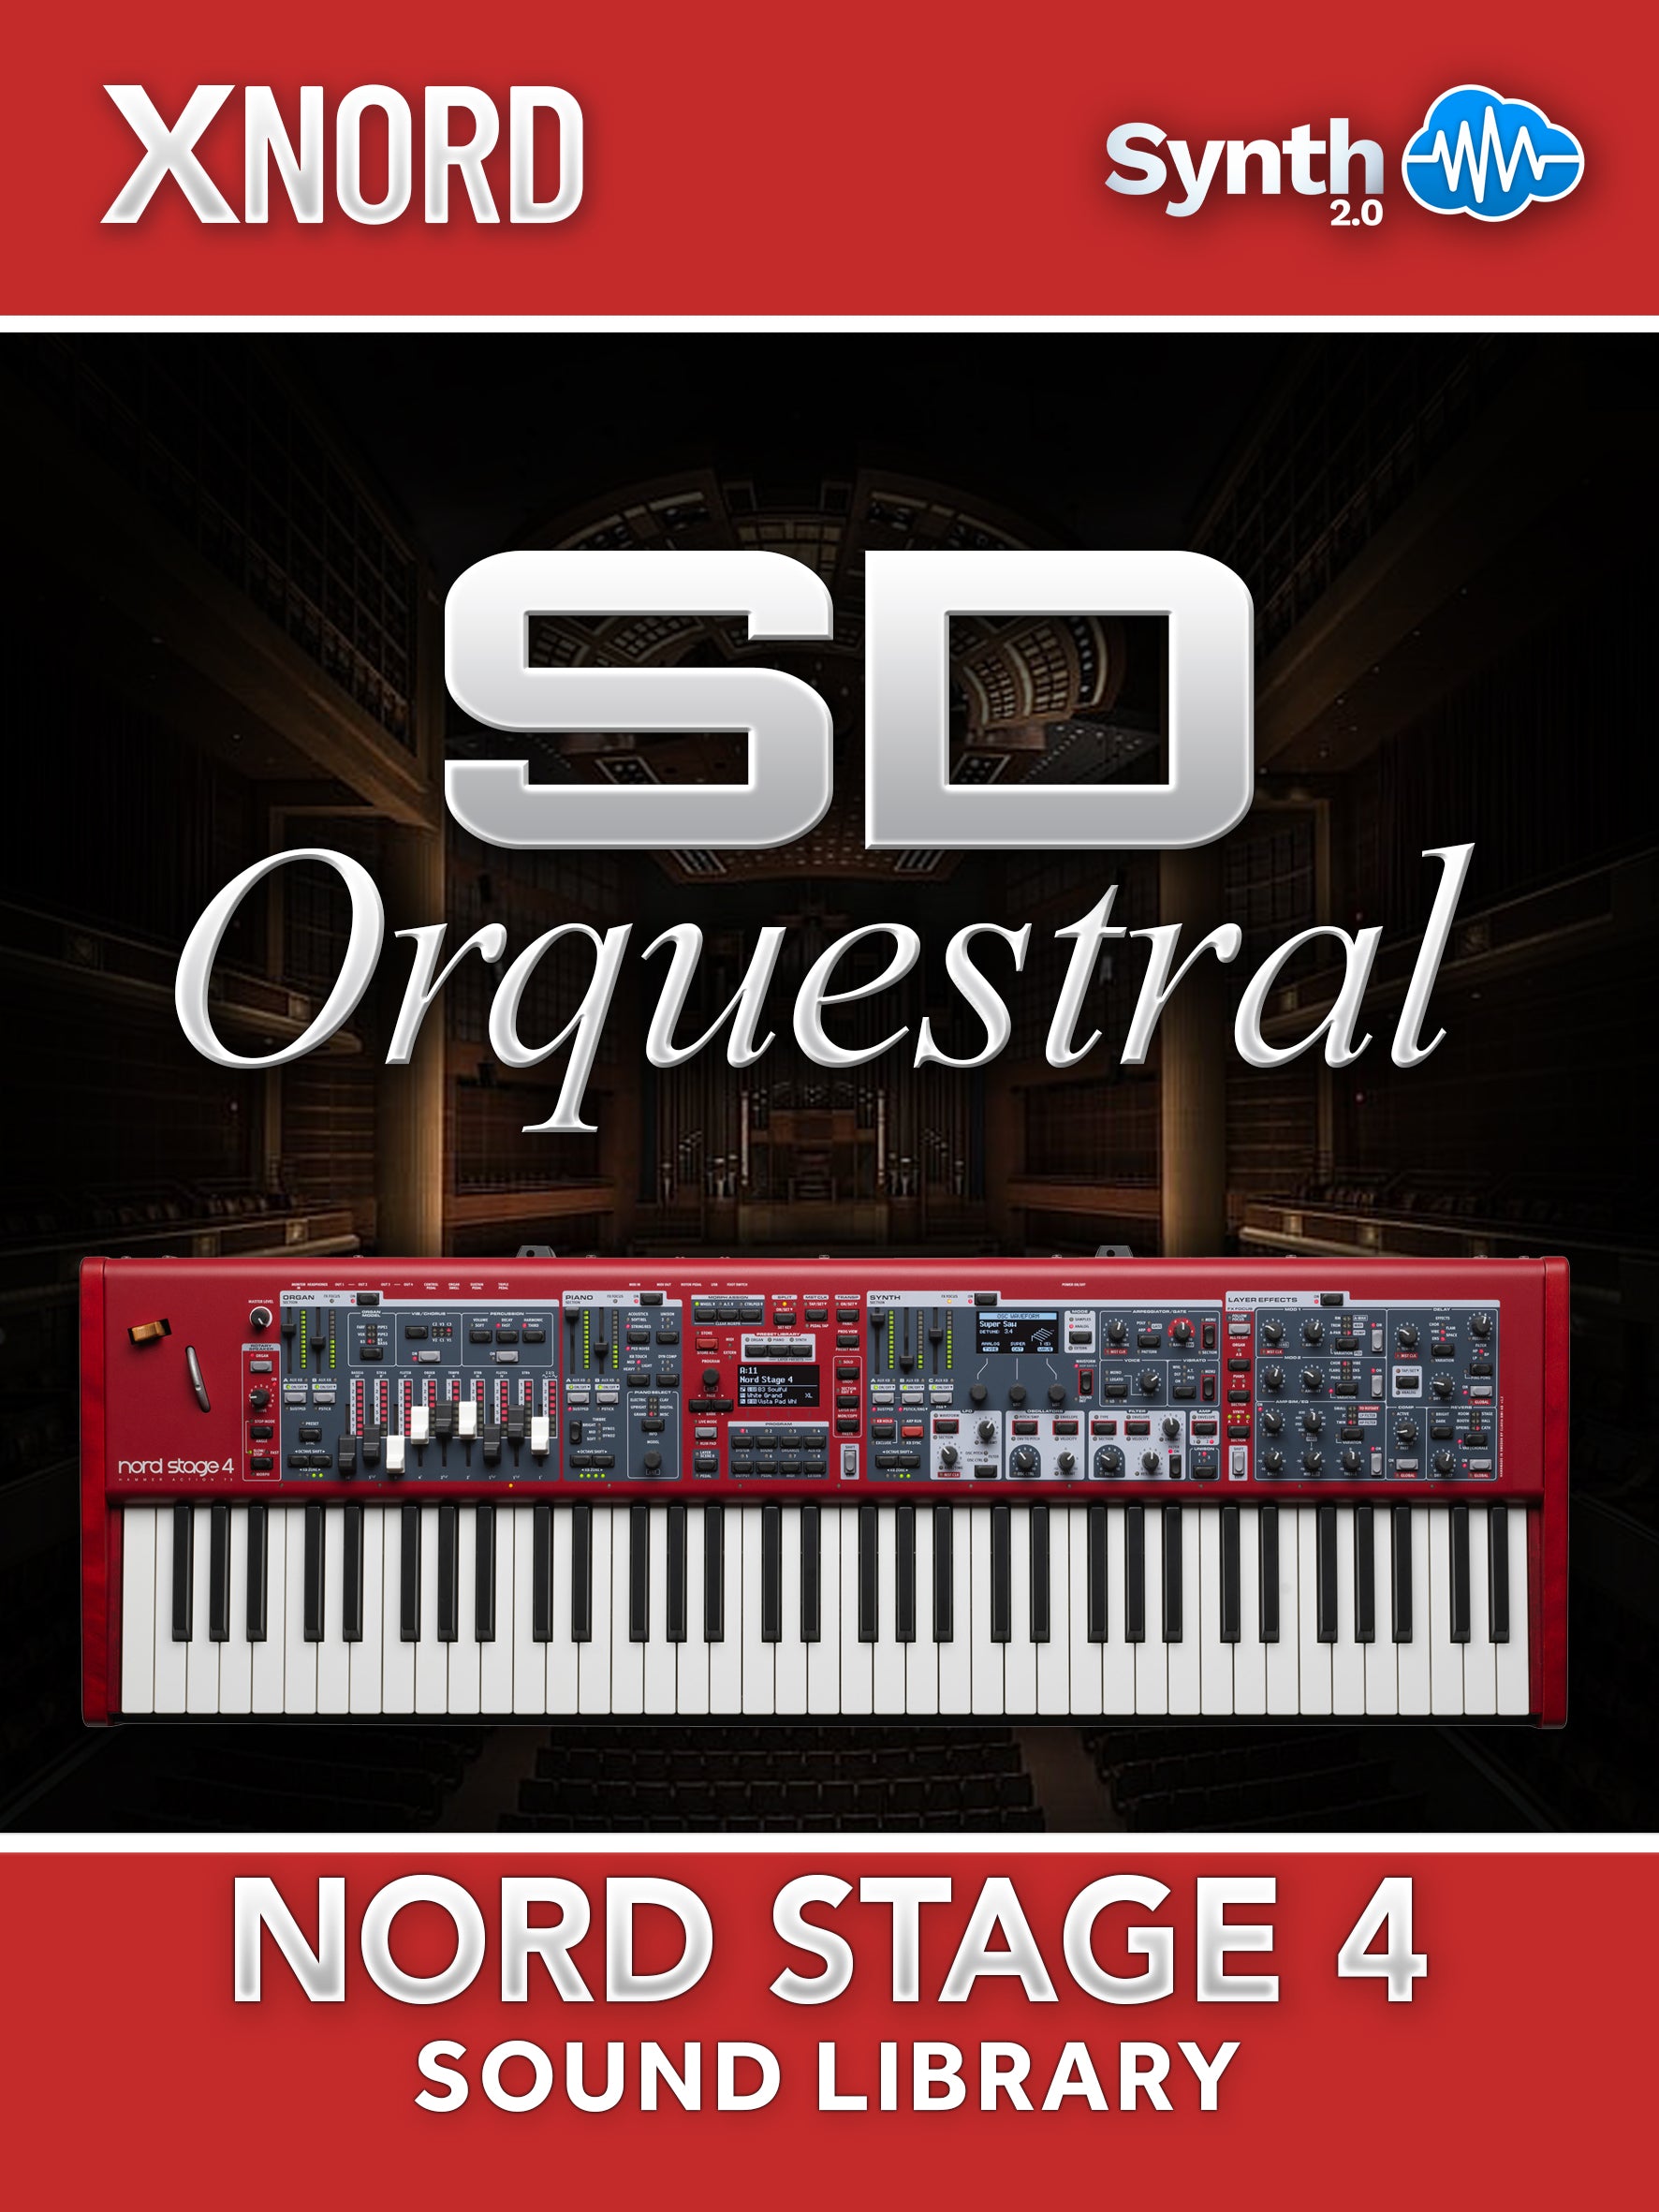 SCL414 - ( Bundle ) - SD Orquestral + Complete Organs Collection V2 - Nord Stage 4